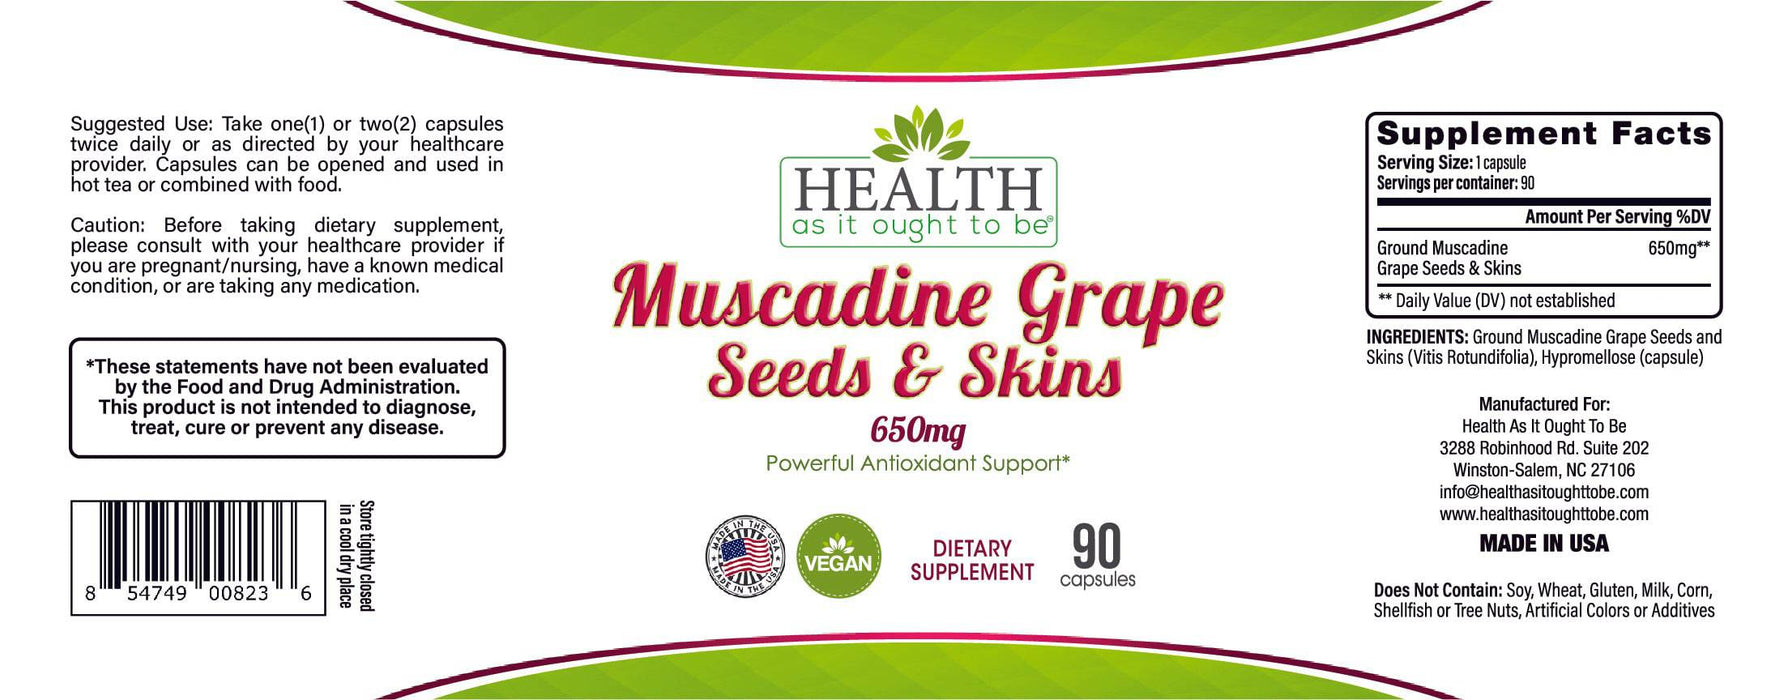 HAIOTB Muscadine Grape Seed & Skins 650 mg - 90 Capsules - Health As It Ought to Be